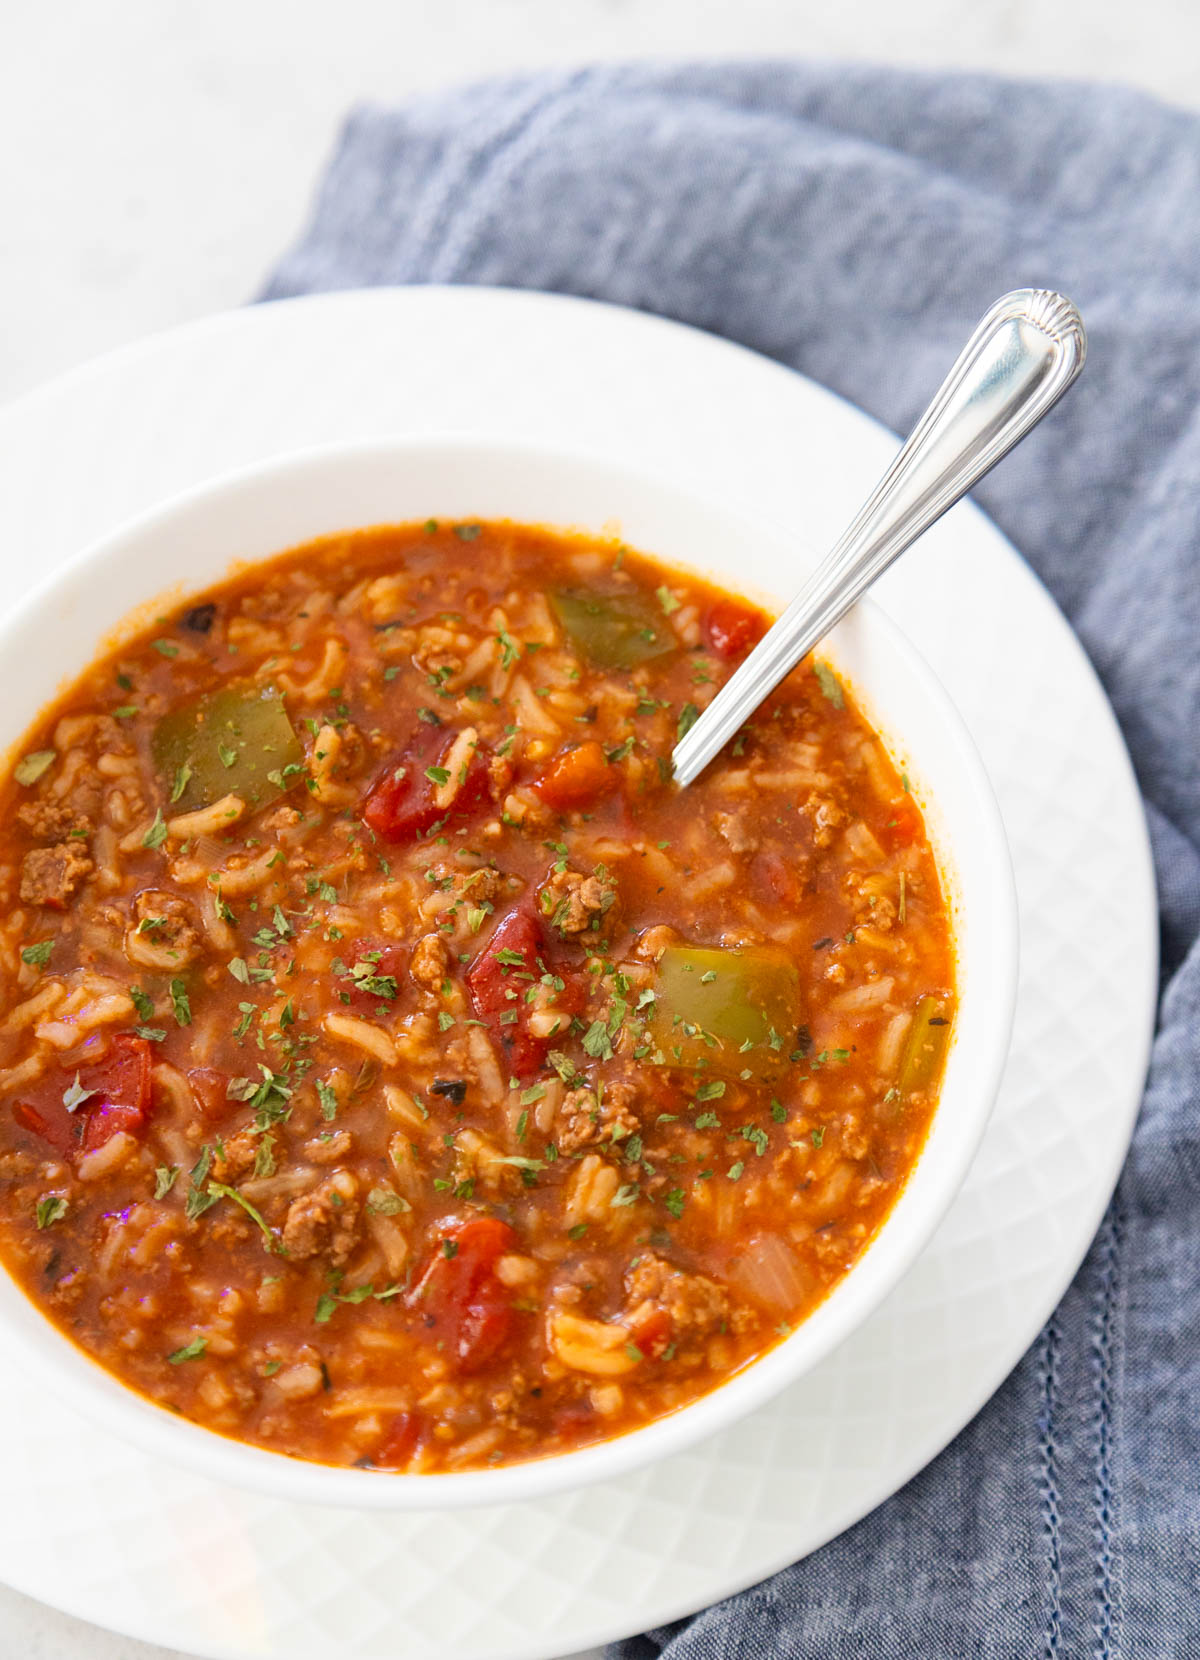 A bowl of tomato-based stuffed pepper soup has rice, chunks of bell peppers, and ground beef floating in the broth.